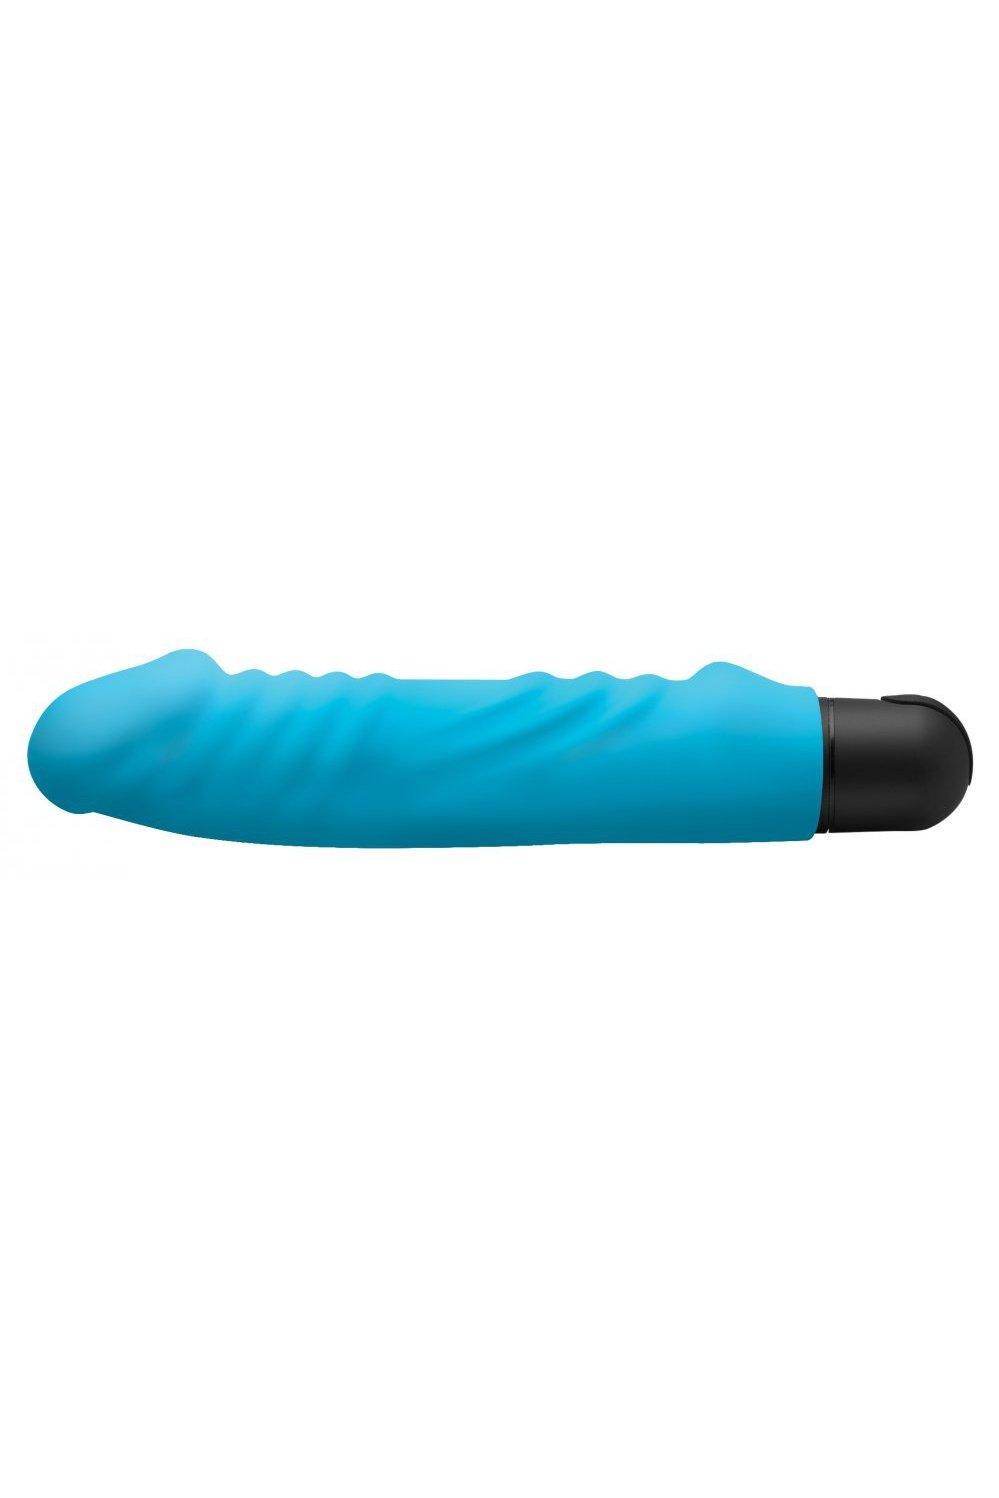 4-In-1 XL Silicone Bullet and Sleeves Kit - Sex On the Go